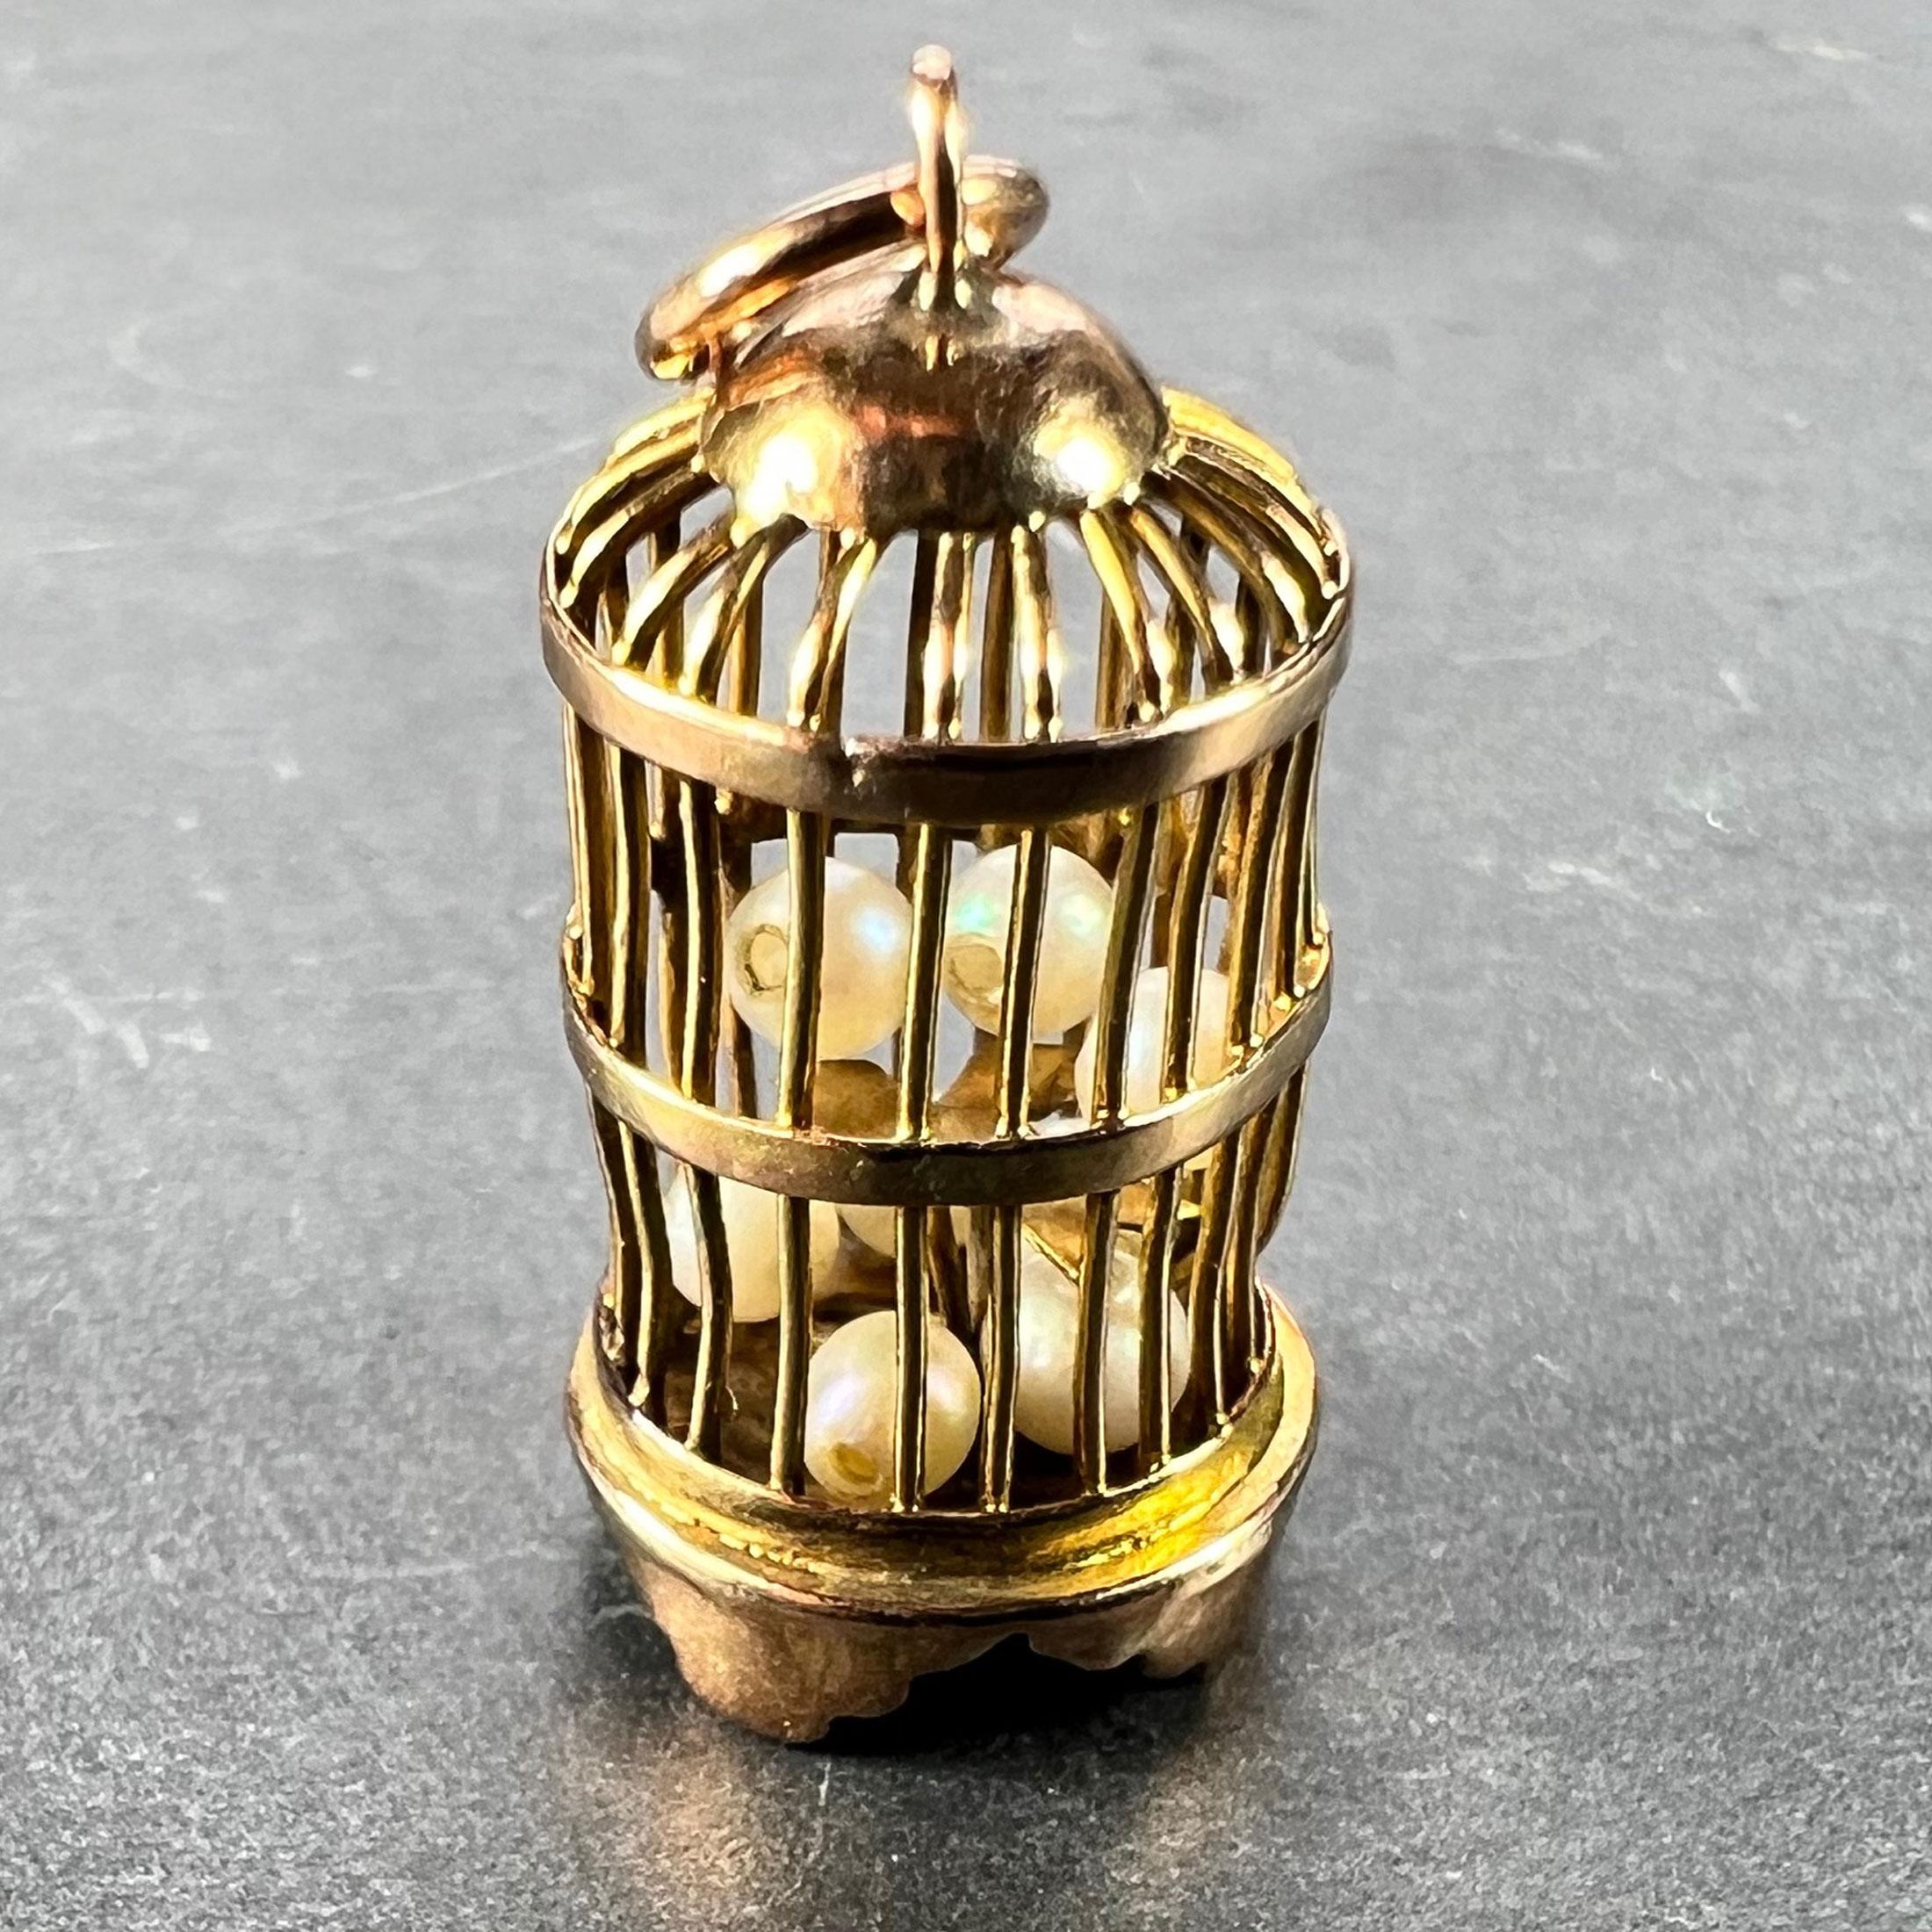 A 14 karat (14K) yellow gold charm pendant designed as a bird cage containing eight loose drilled cultured pearls. Stamped 14K for 14 karat gold to the base. 

Dimensions: 2 x 1 x 1 cm (Not including jump ring)
Weight: 1.63 grams
(Chain not